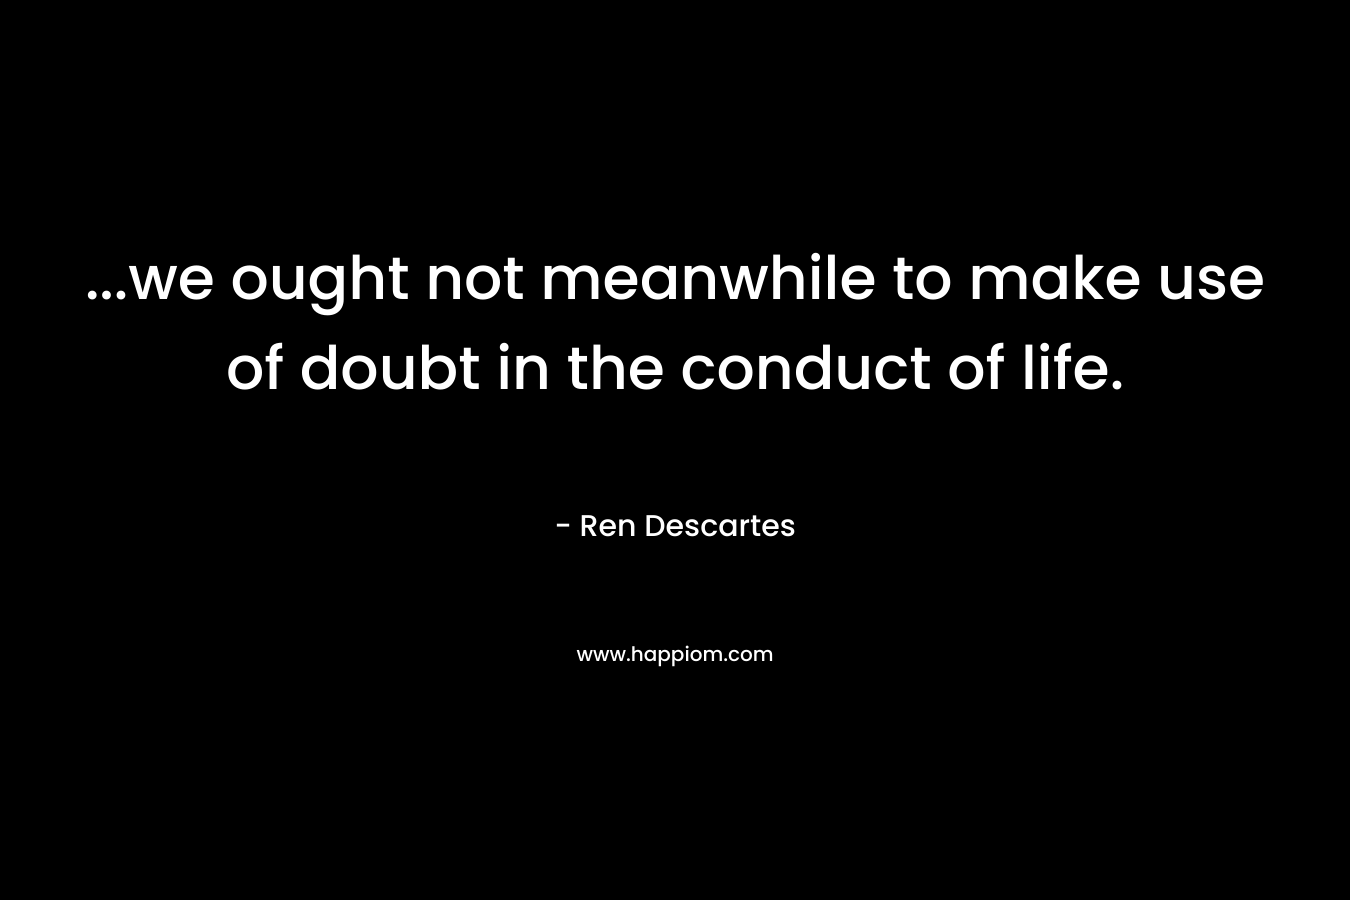 ...we ought not meanwhile to make use of doubt in the conduct of life.